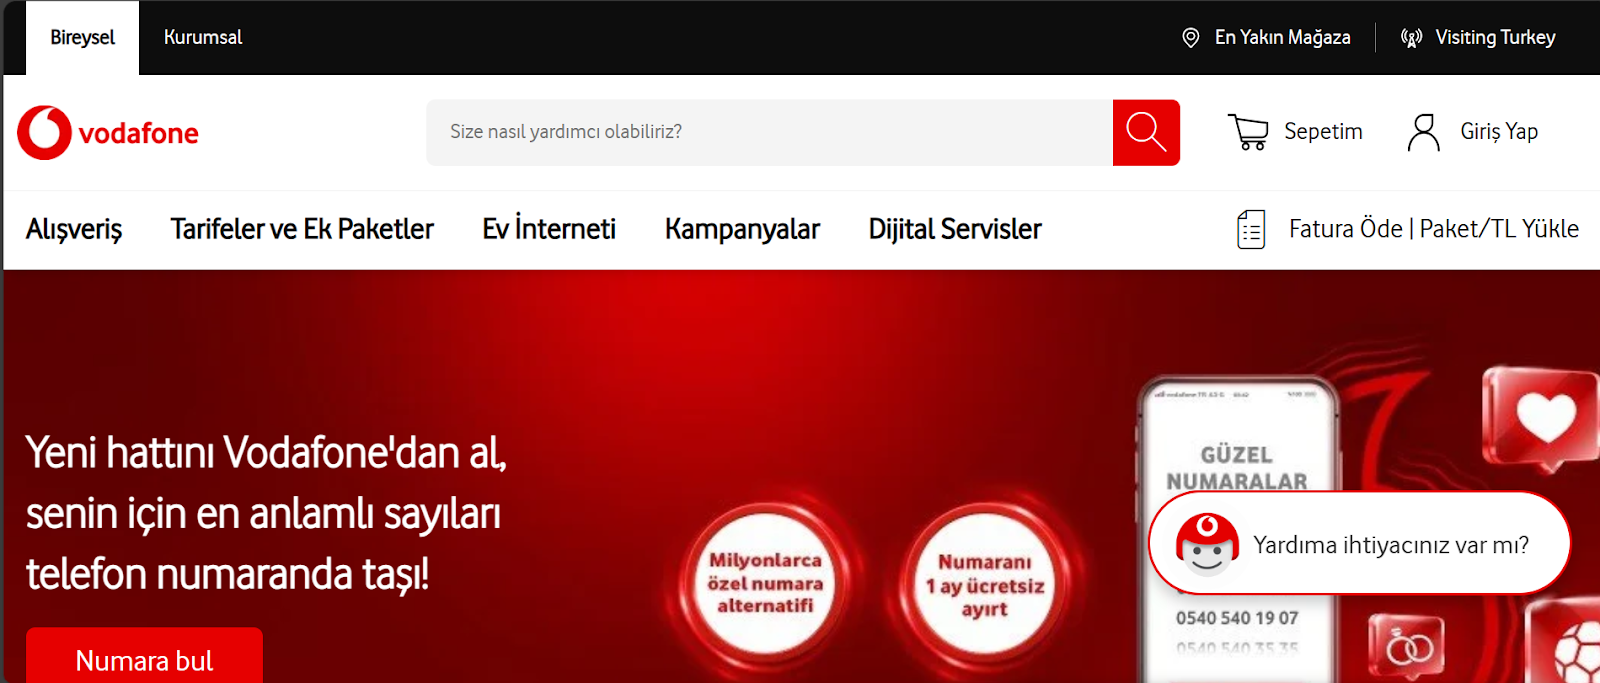 Vodafone Turkey website snapshot highlighting the services it offers.